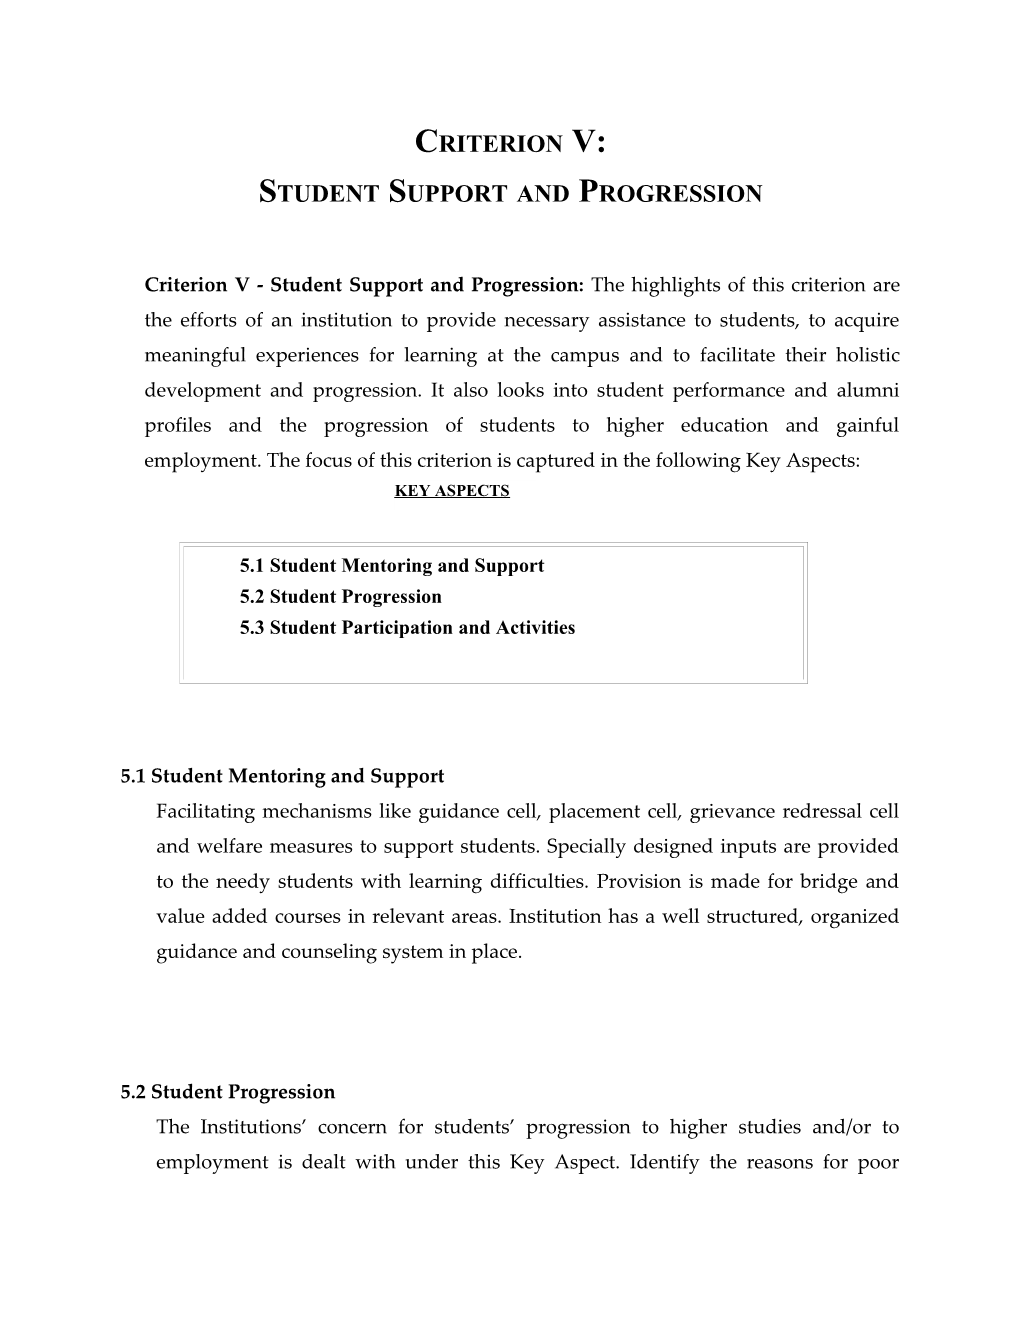 Student Support and Progression